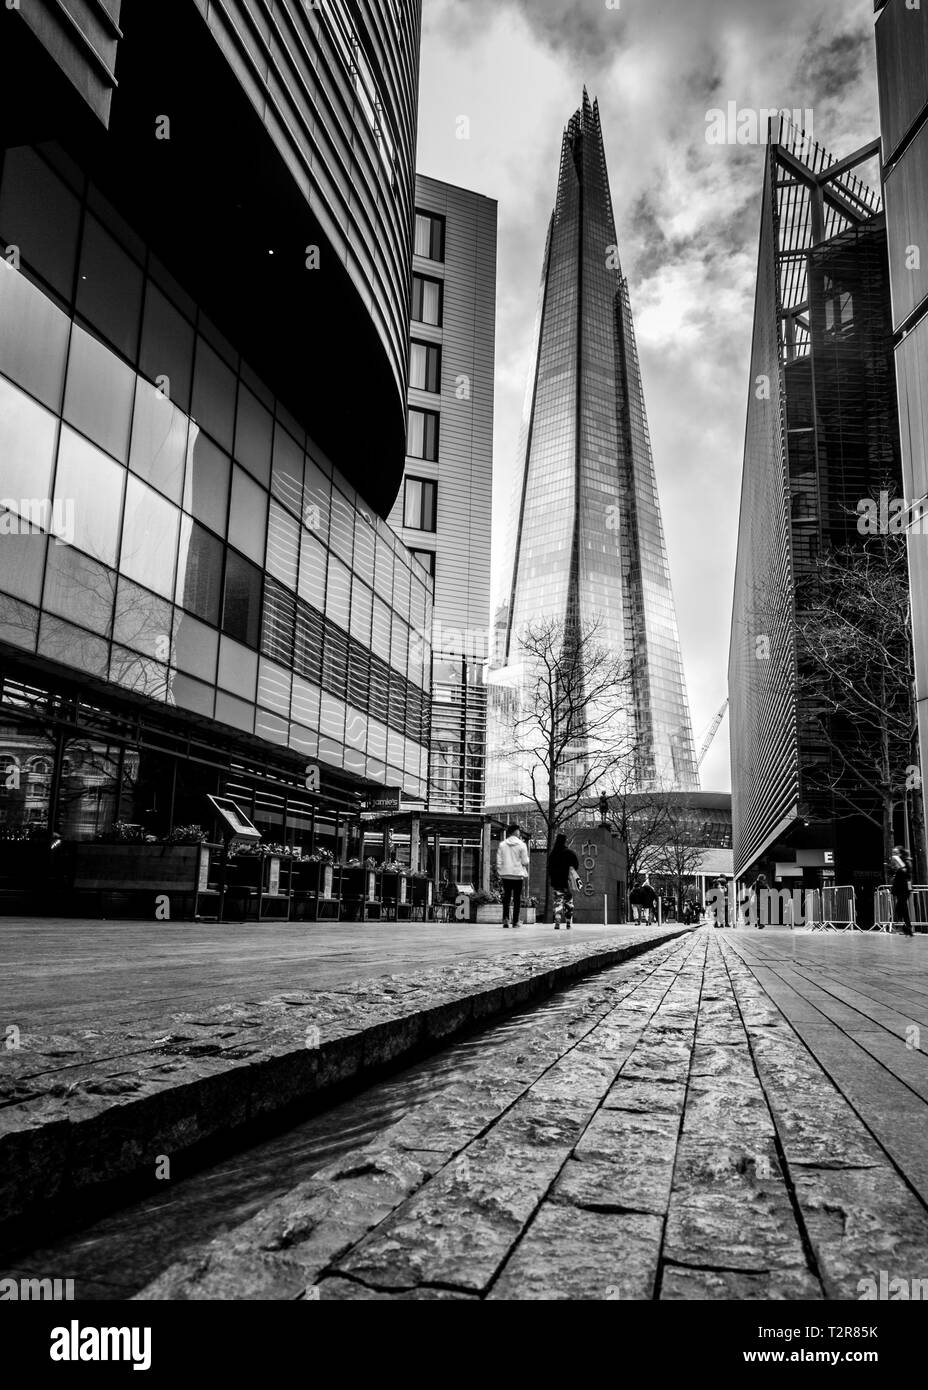 The stunning glass Shard building in London is still the tallest building in Europe minus Russia. Stock Photo